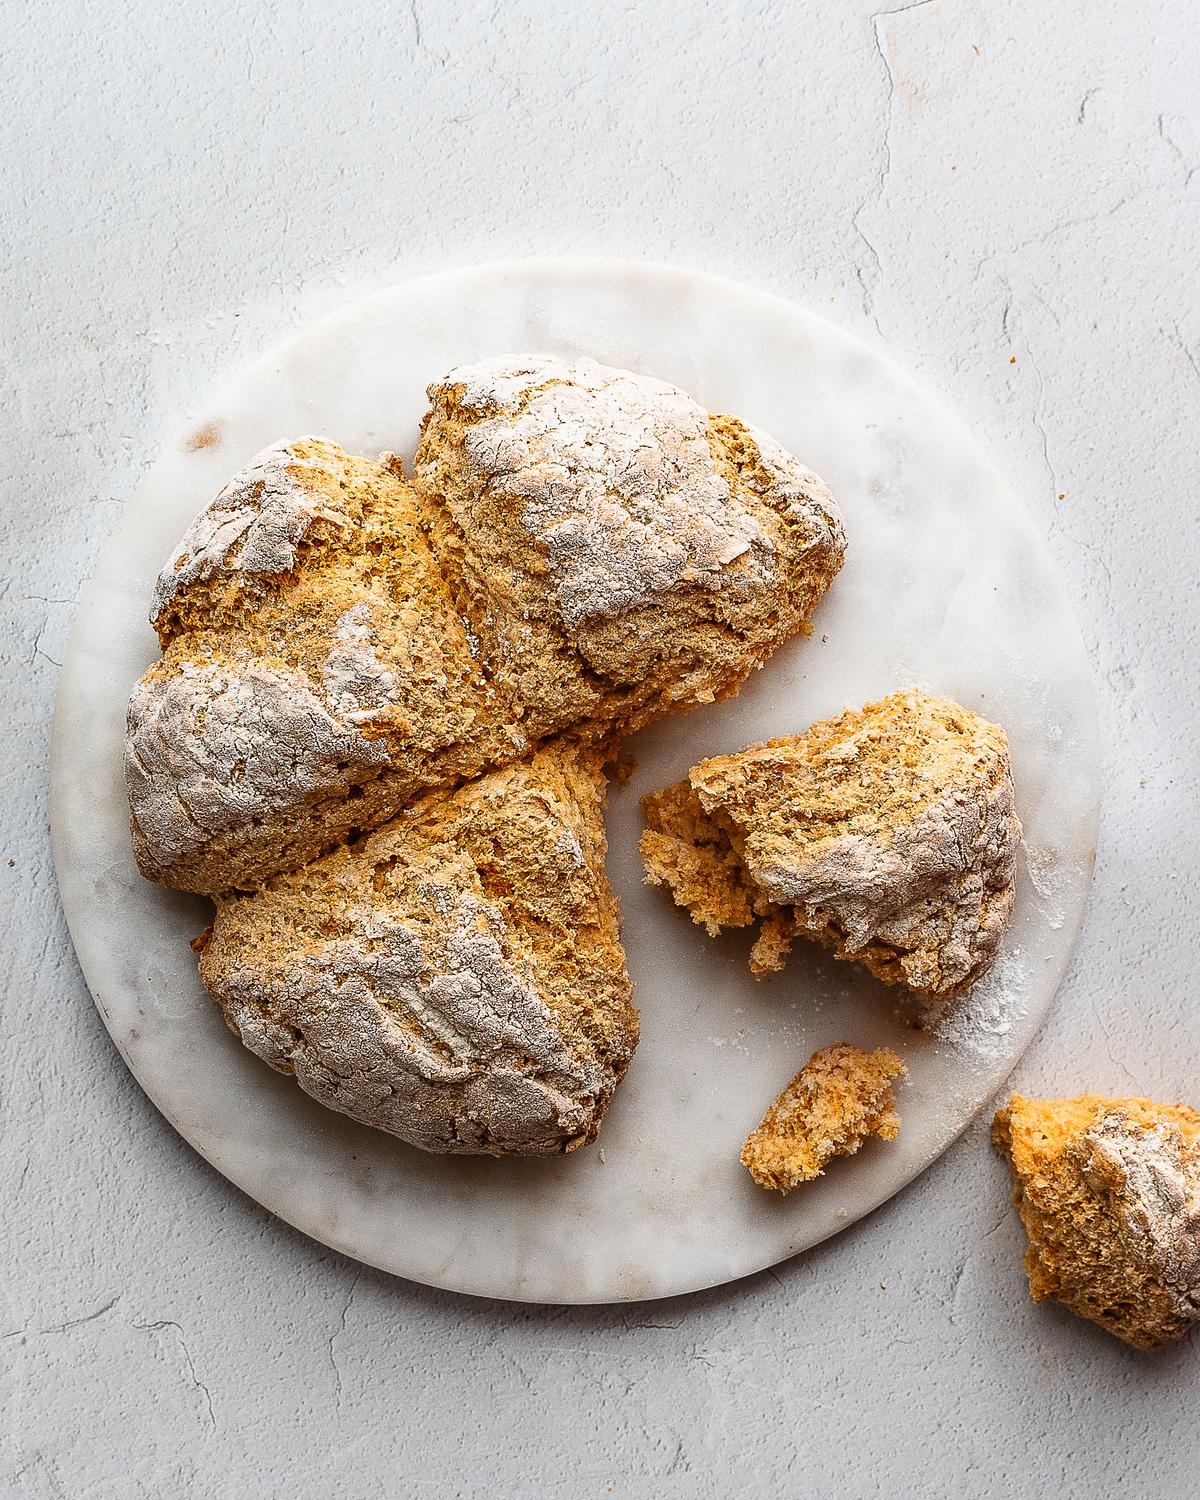 Brown soda bread has a rich, wheaten flavor and rustic quality to it. (Jennifer McGruther)